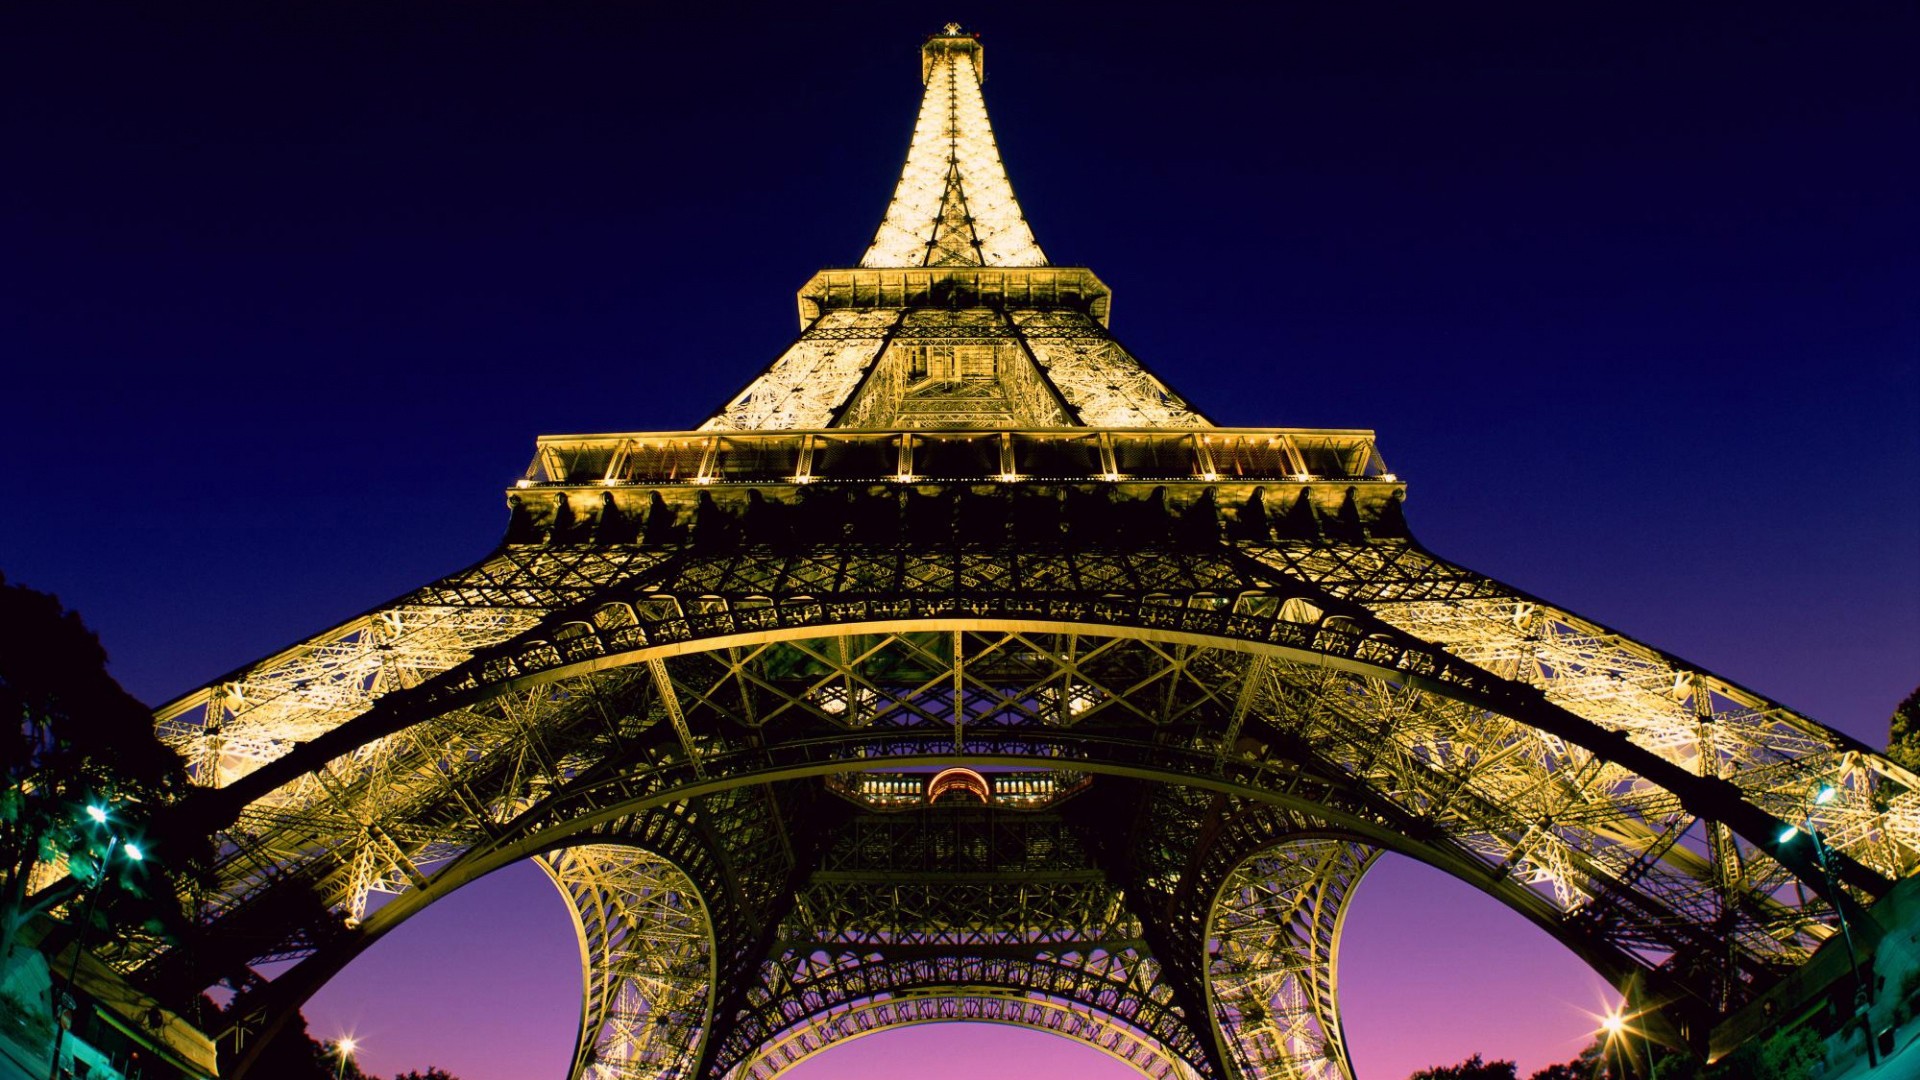 General 1920x1080 Paris architecture Eiffel Tower low-angle construction lights worm's eye view France landmark Europe